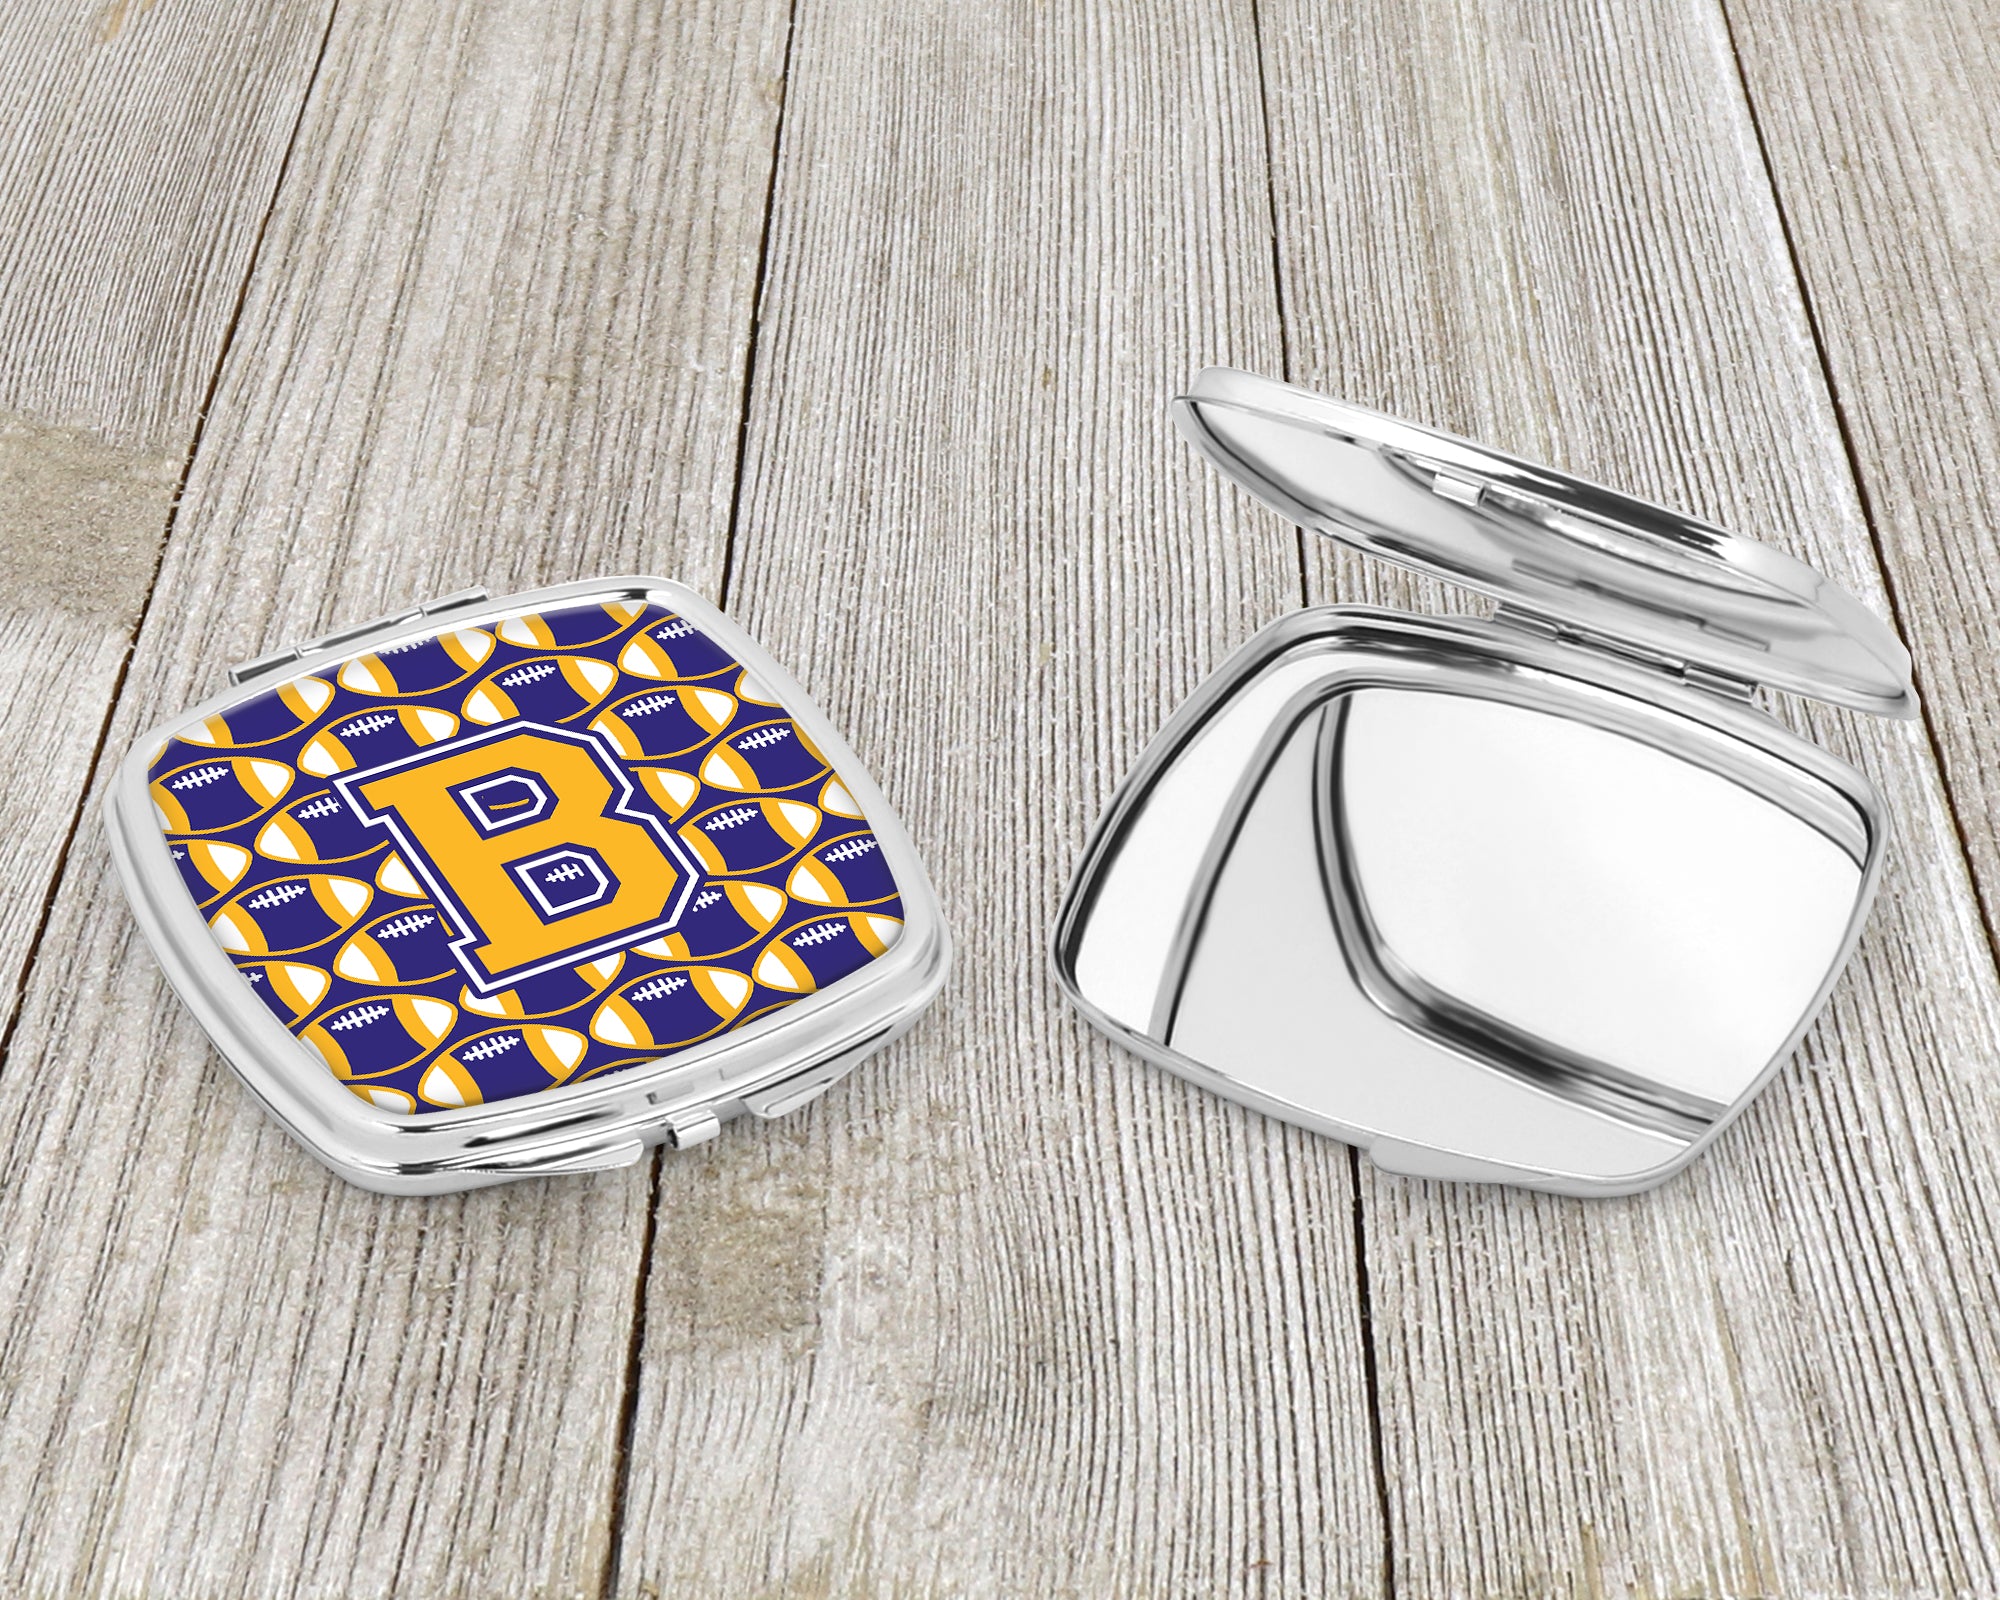 Letter B Football Purple and Gold Compact Mirror CJ1064-BSCM  the-store.com.